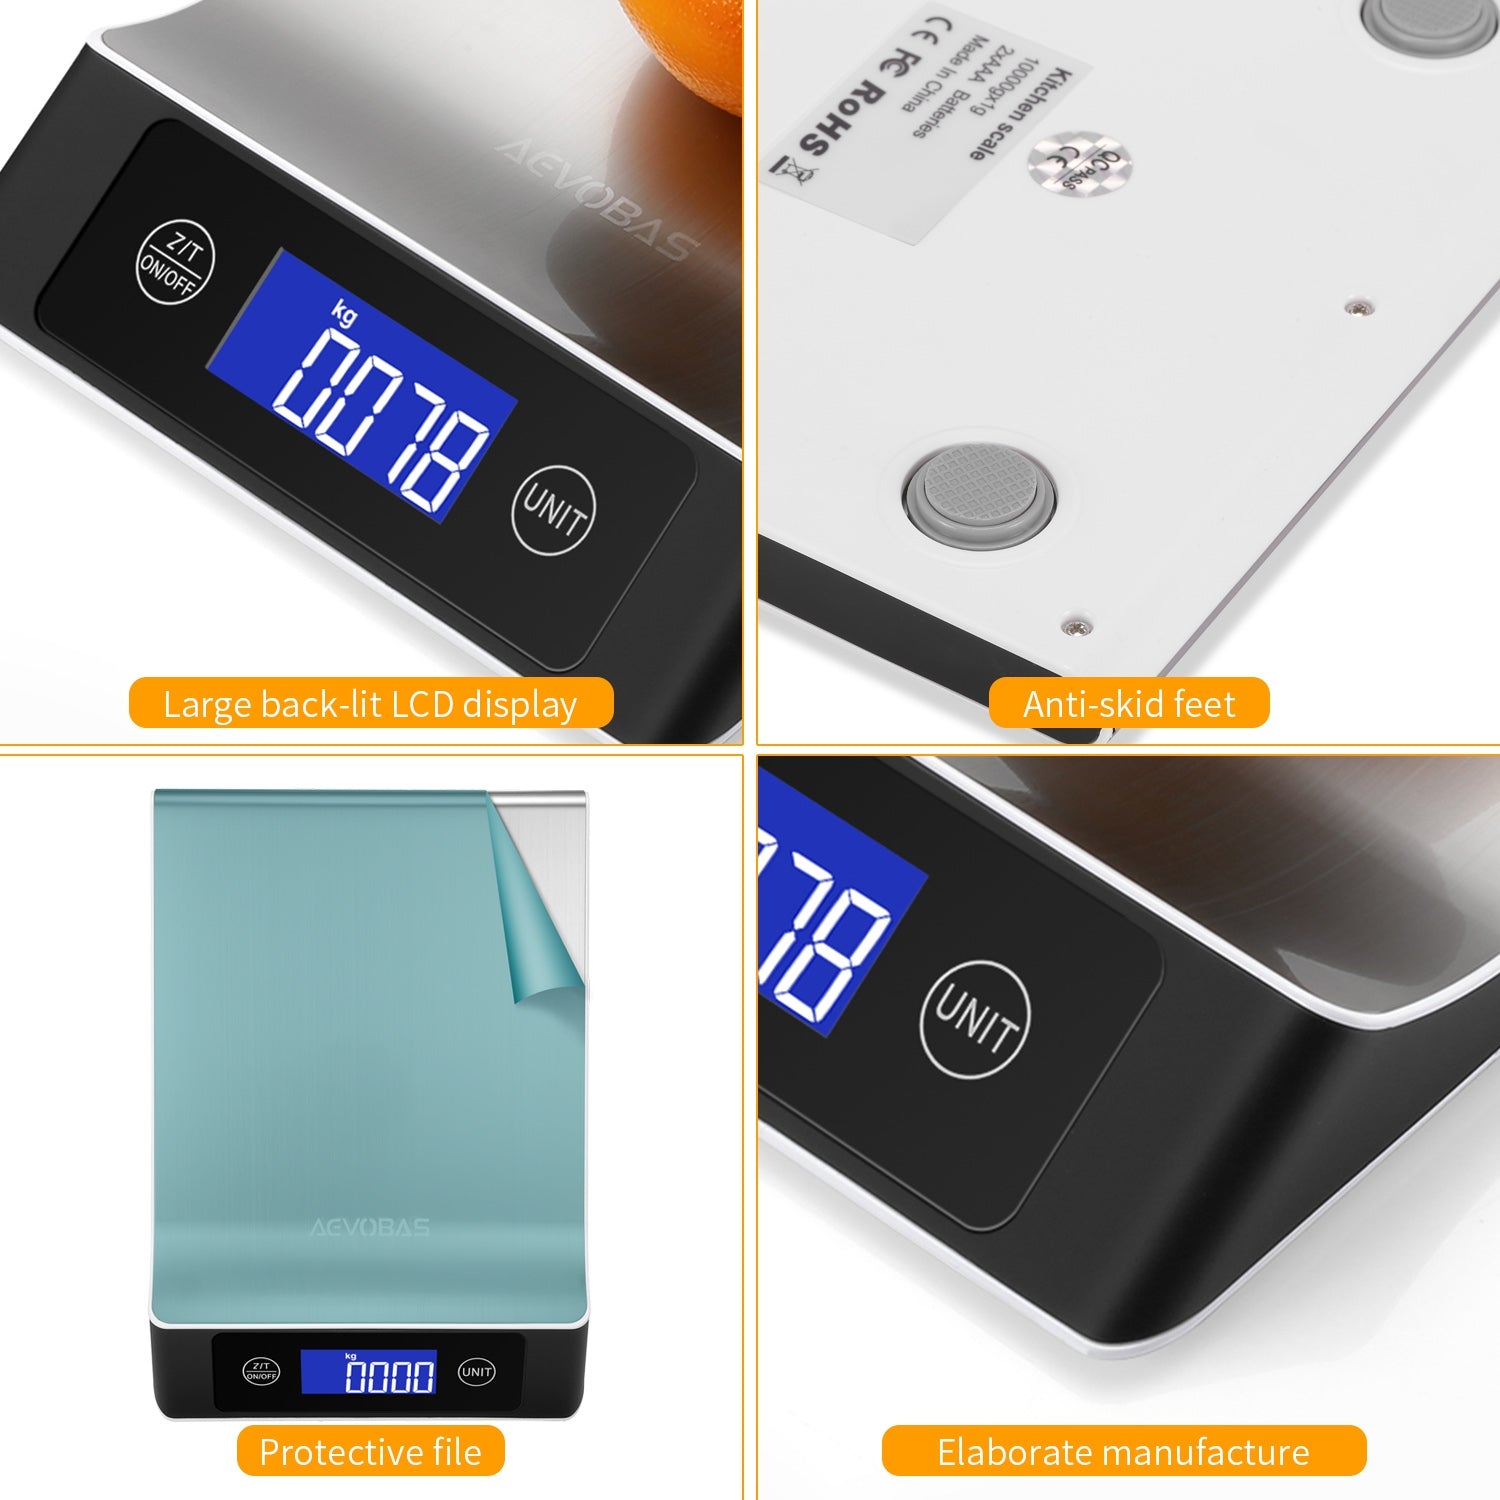 AEVOBAS CX - 2017 Digital Kitchen Food Weighing Scale with Back-lit LCD Display